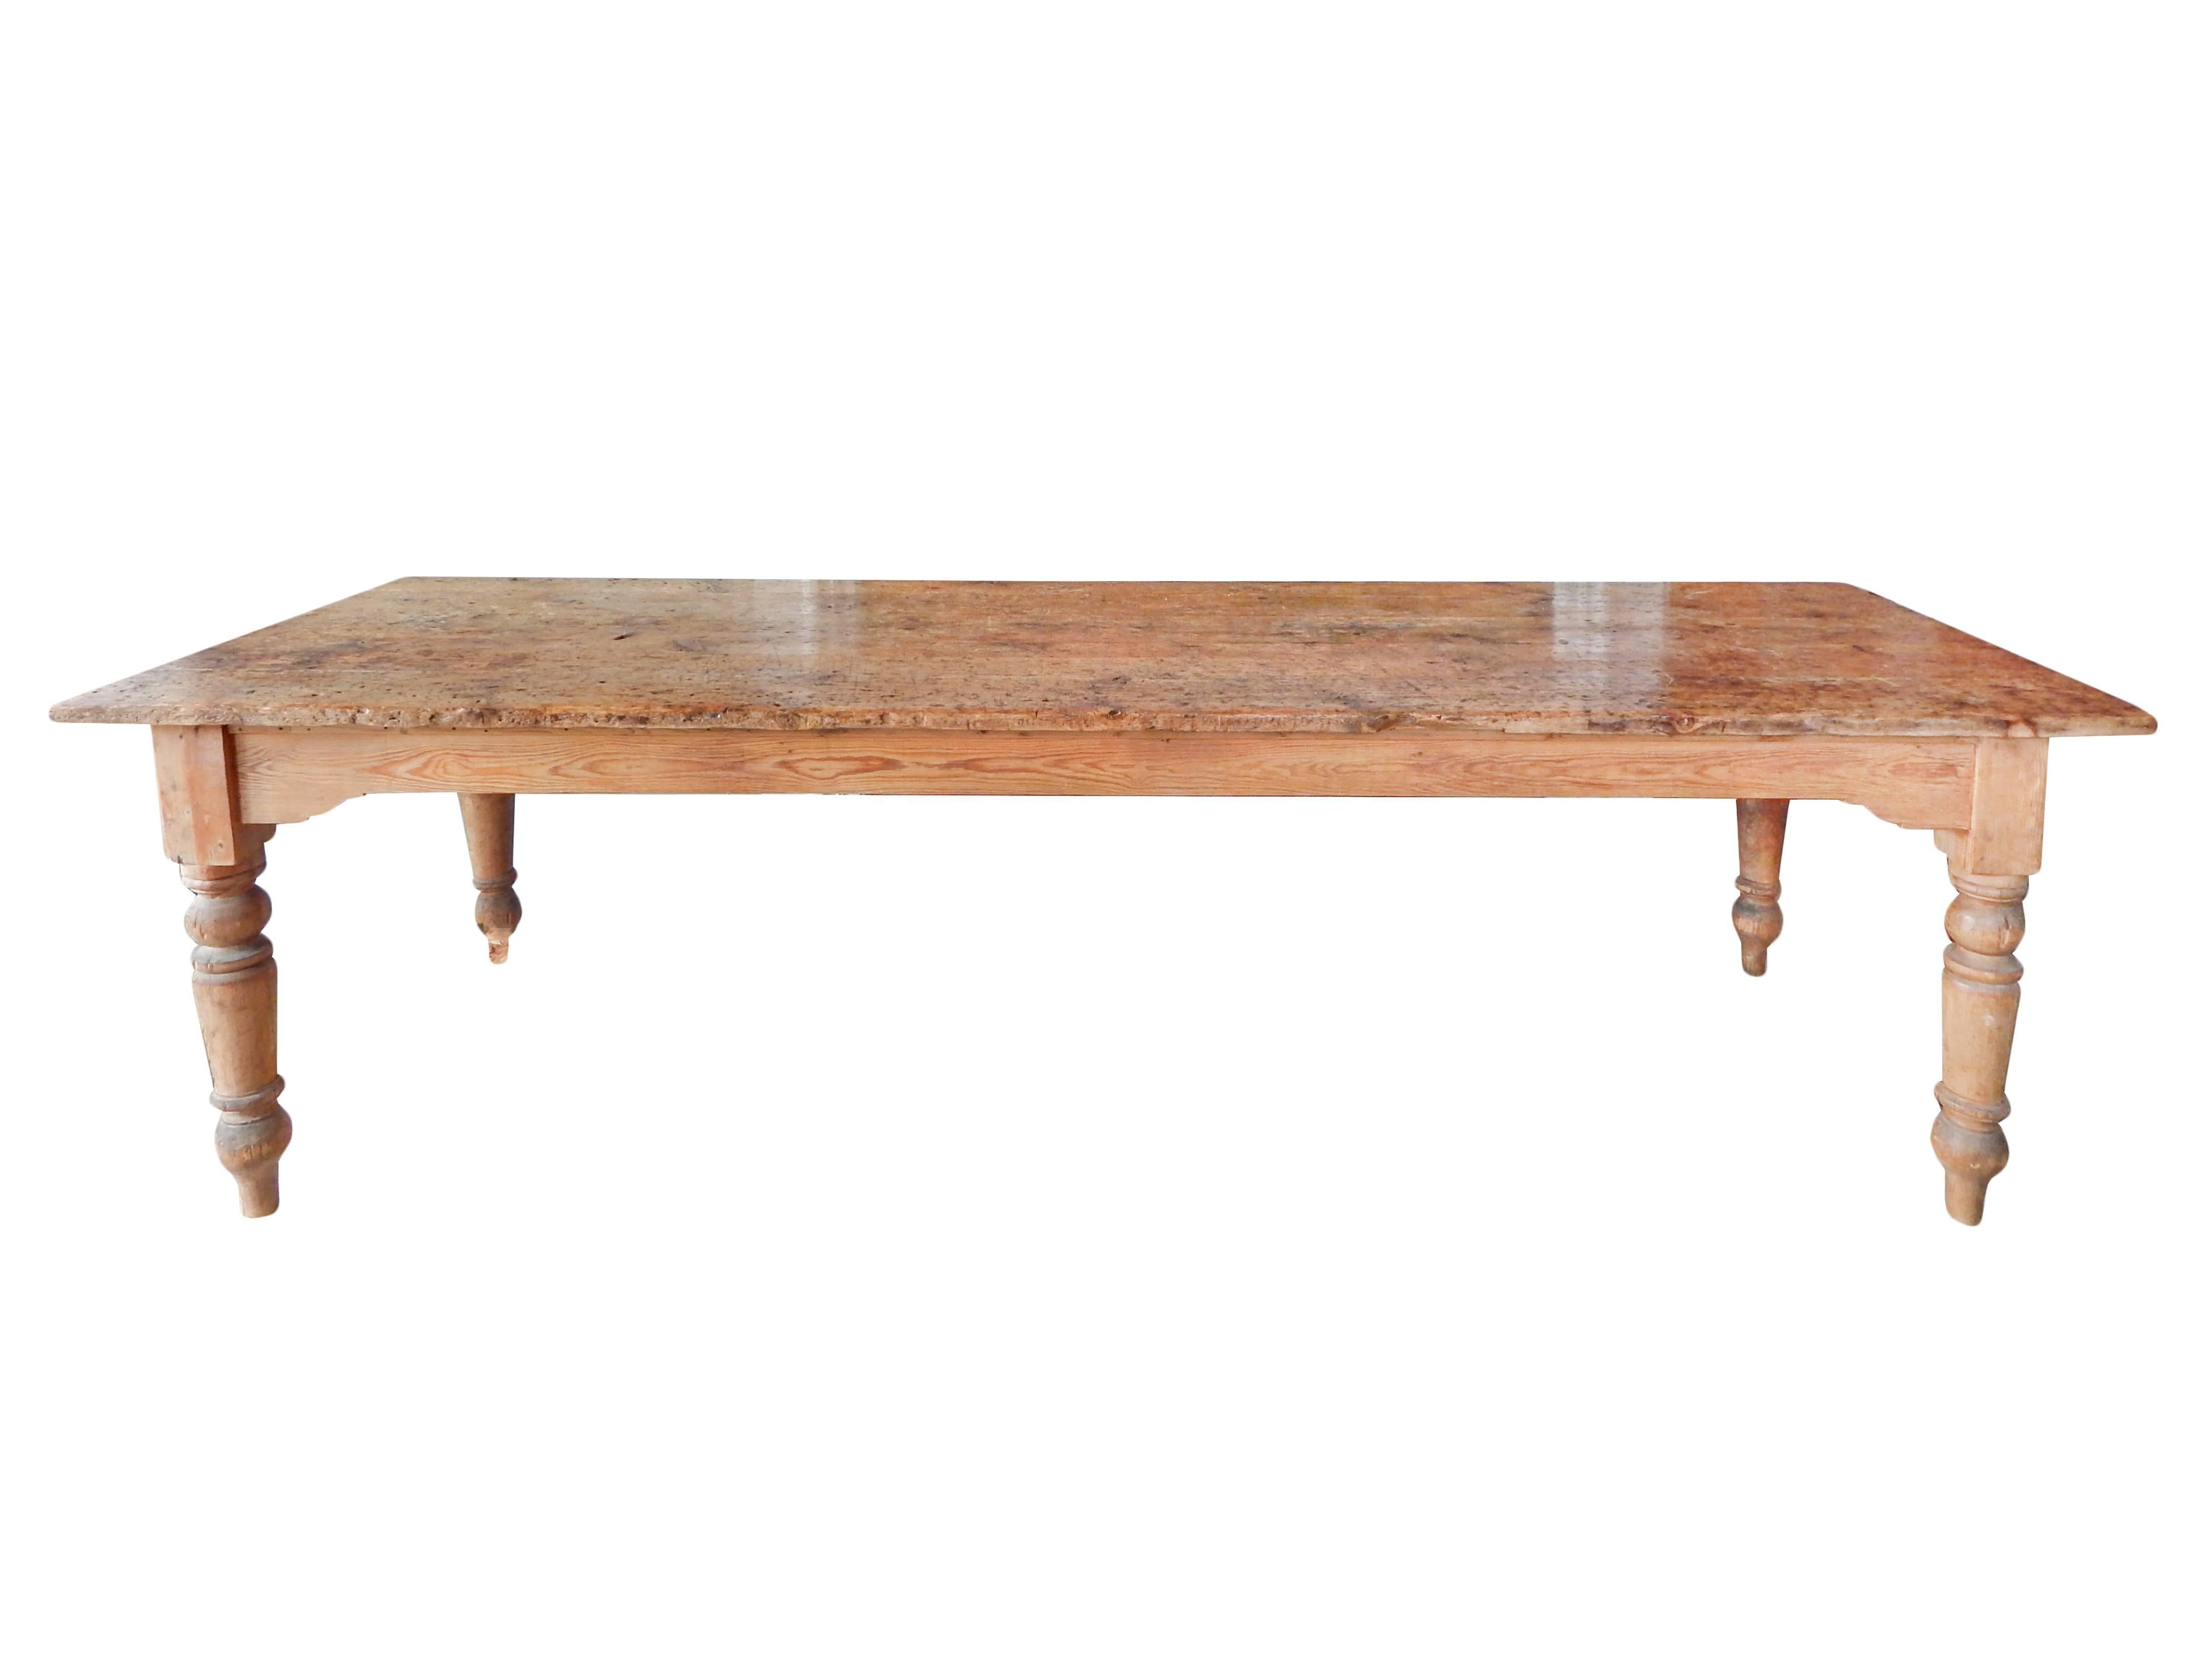 Rustic Old French Farm Table